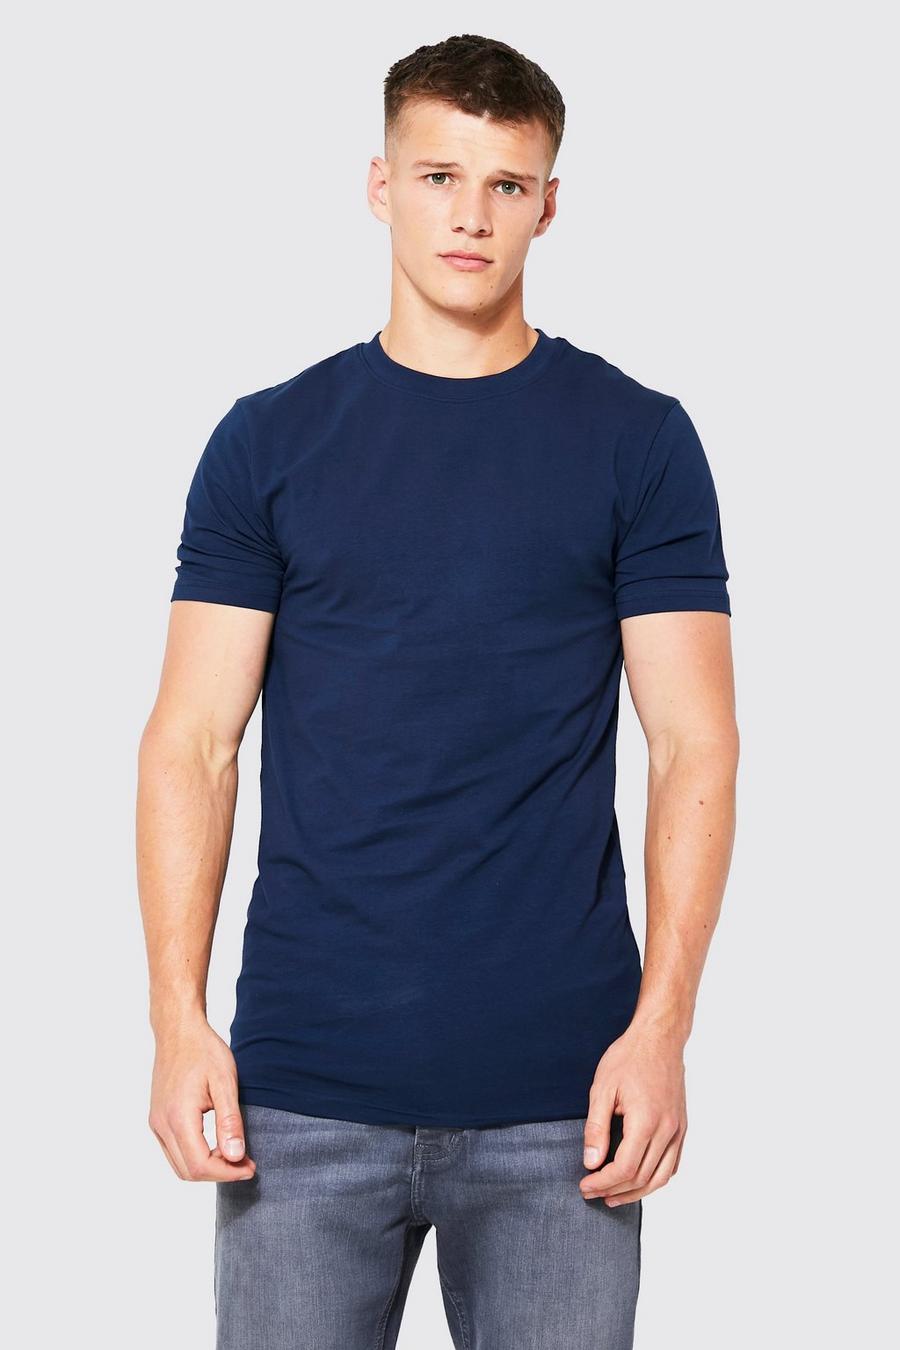 Navy Tall Muscle Fit Basic Crew Neck T-shirt image number 1